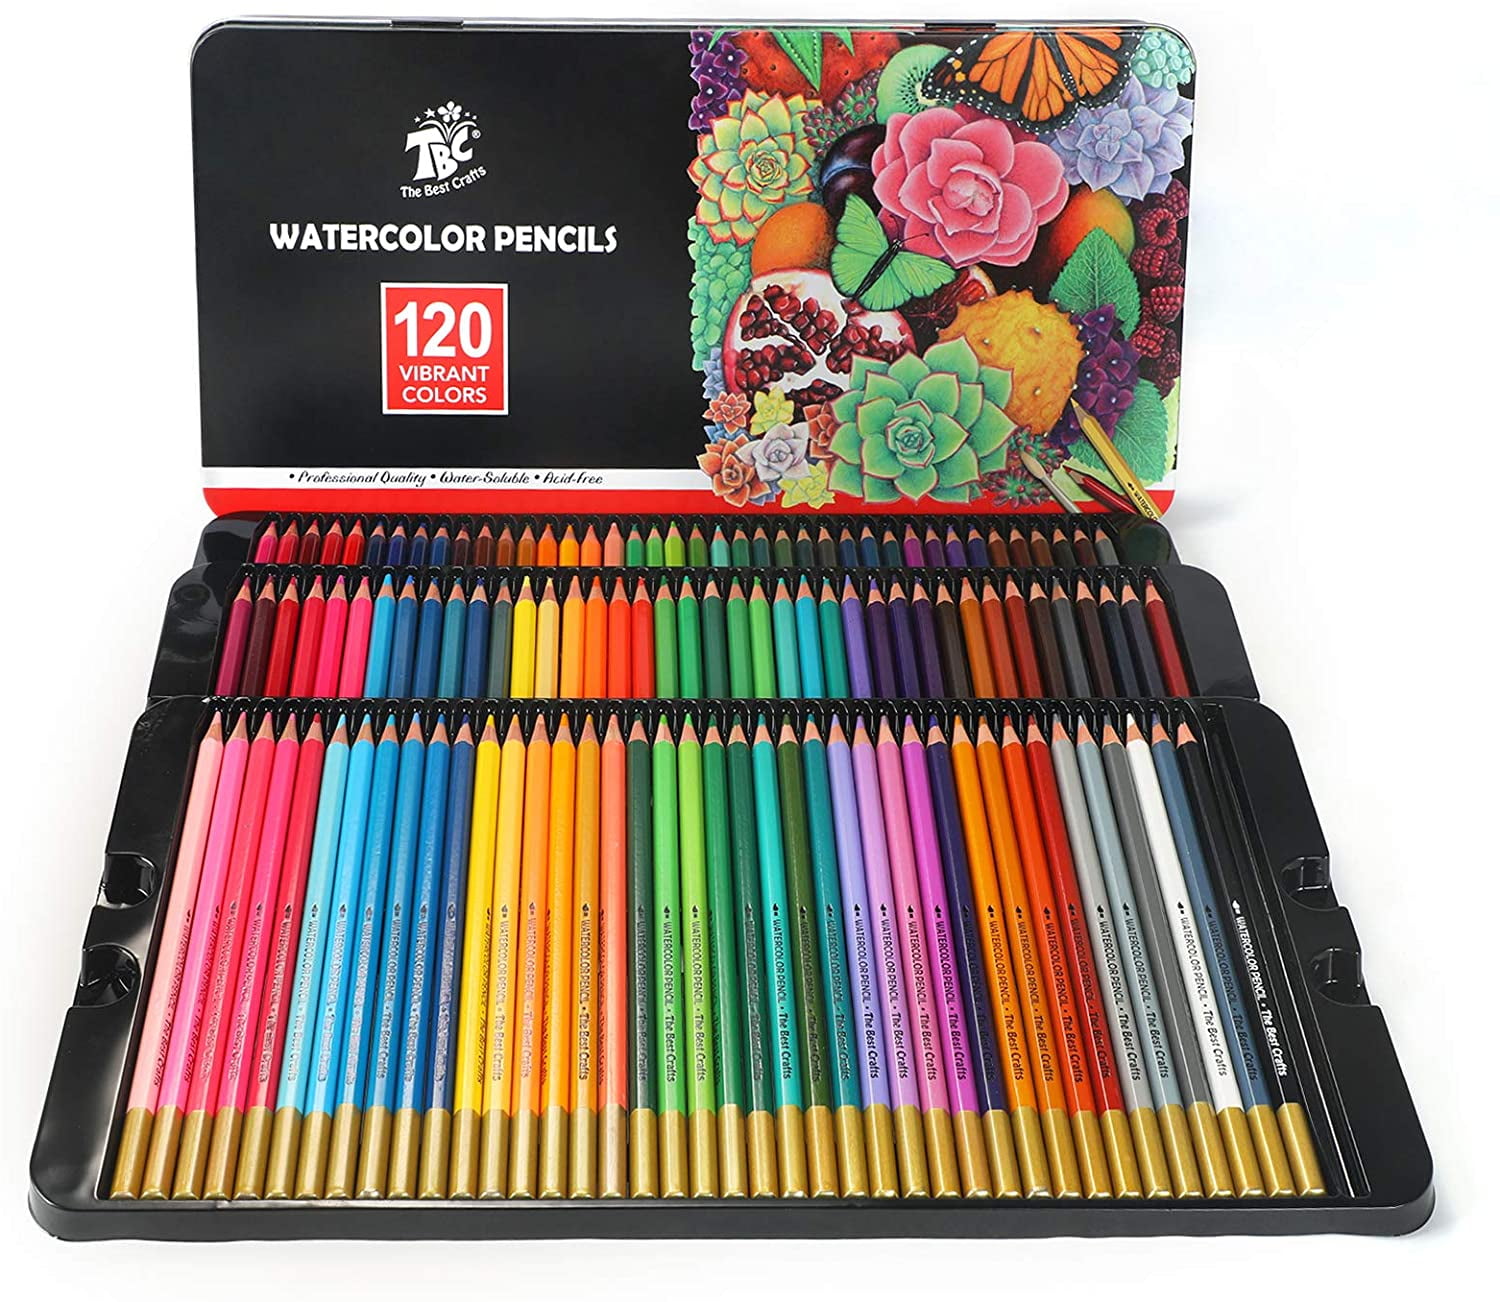 TBC The Best Crafts Painting Kit (132 Piece Set-Iron case), Painting Supplies, Art Kit Includes Watercolor Paint Set, Colored Pencils, Crayons